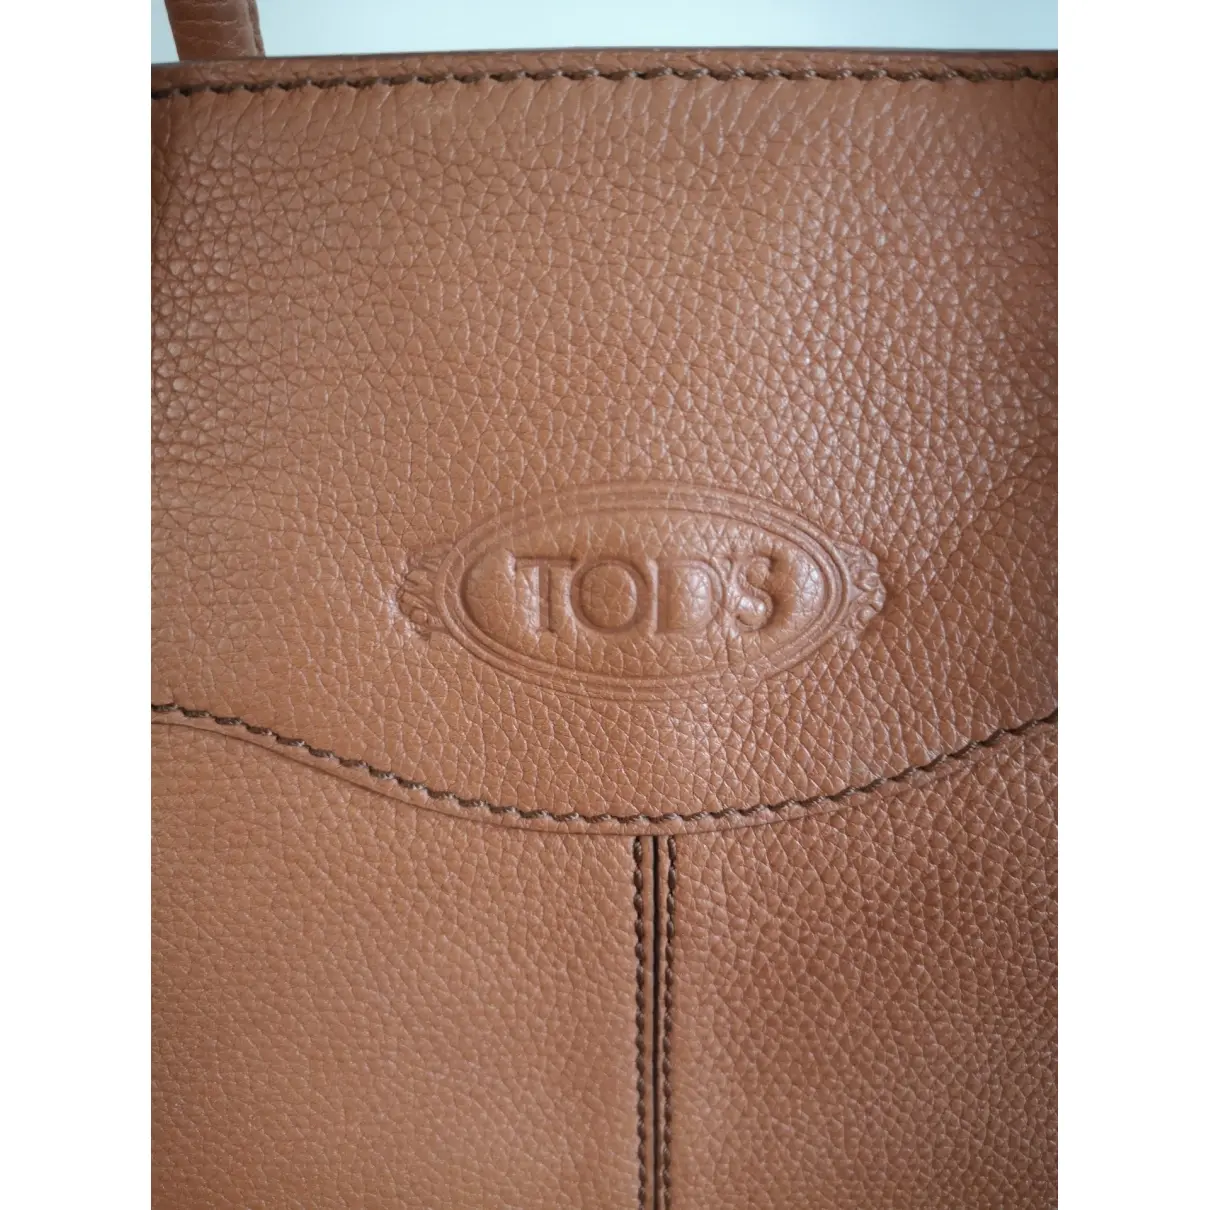 Buy Tod's Leather tote online